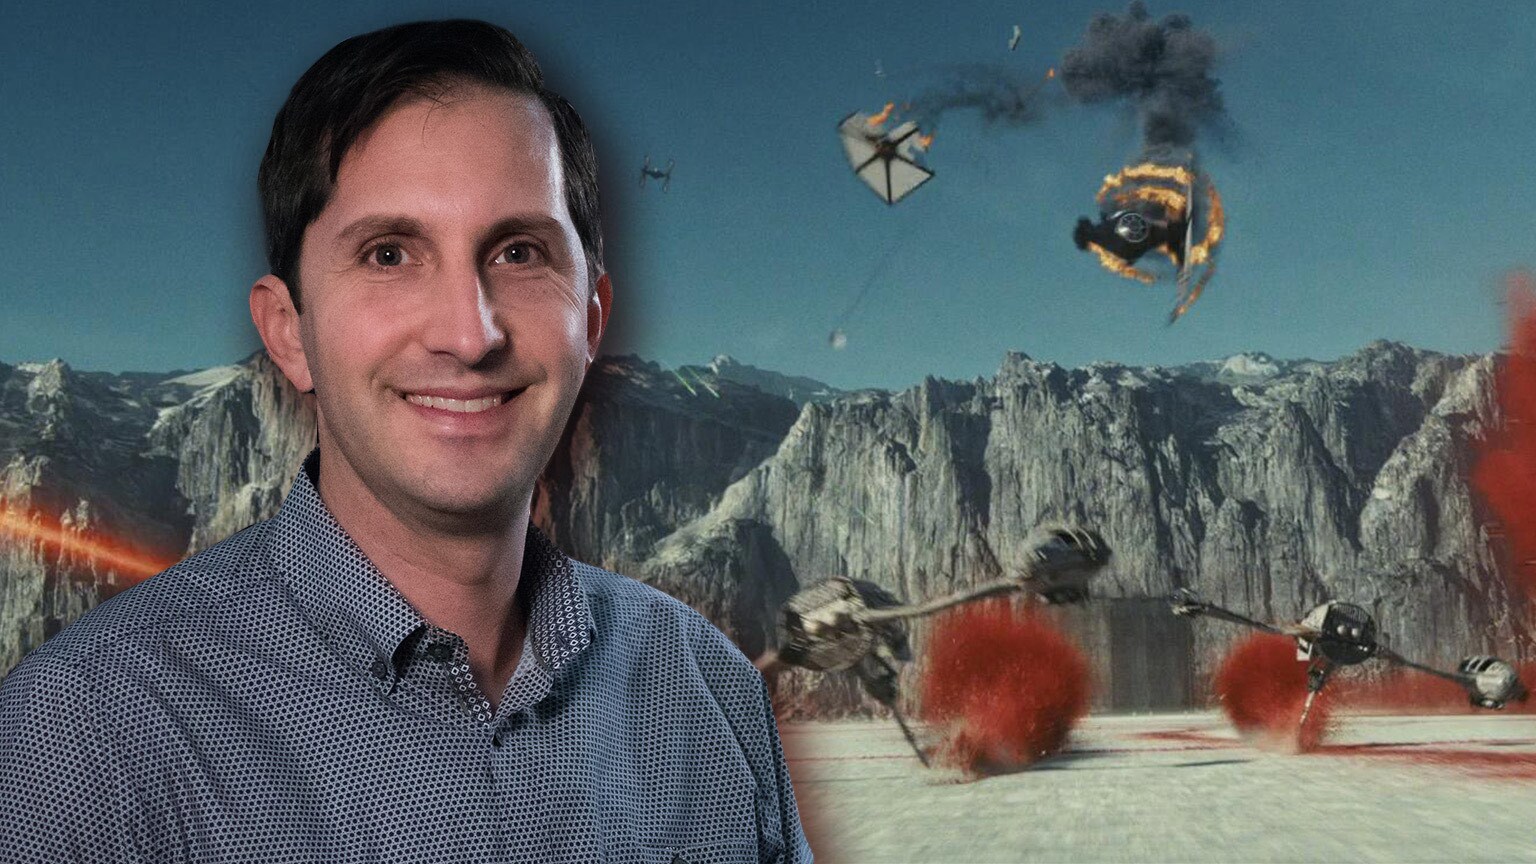 Inside ILM: Talking with David Weitzberg - He Blows Things Up in Star Wars